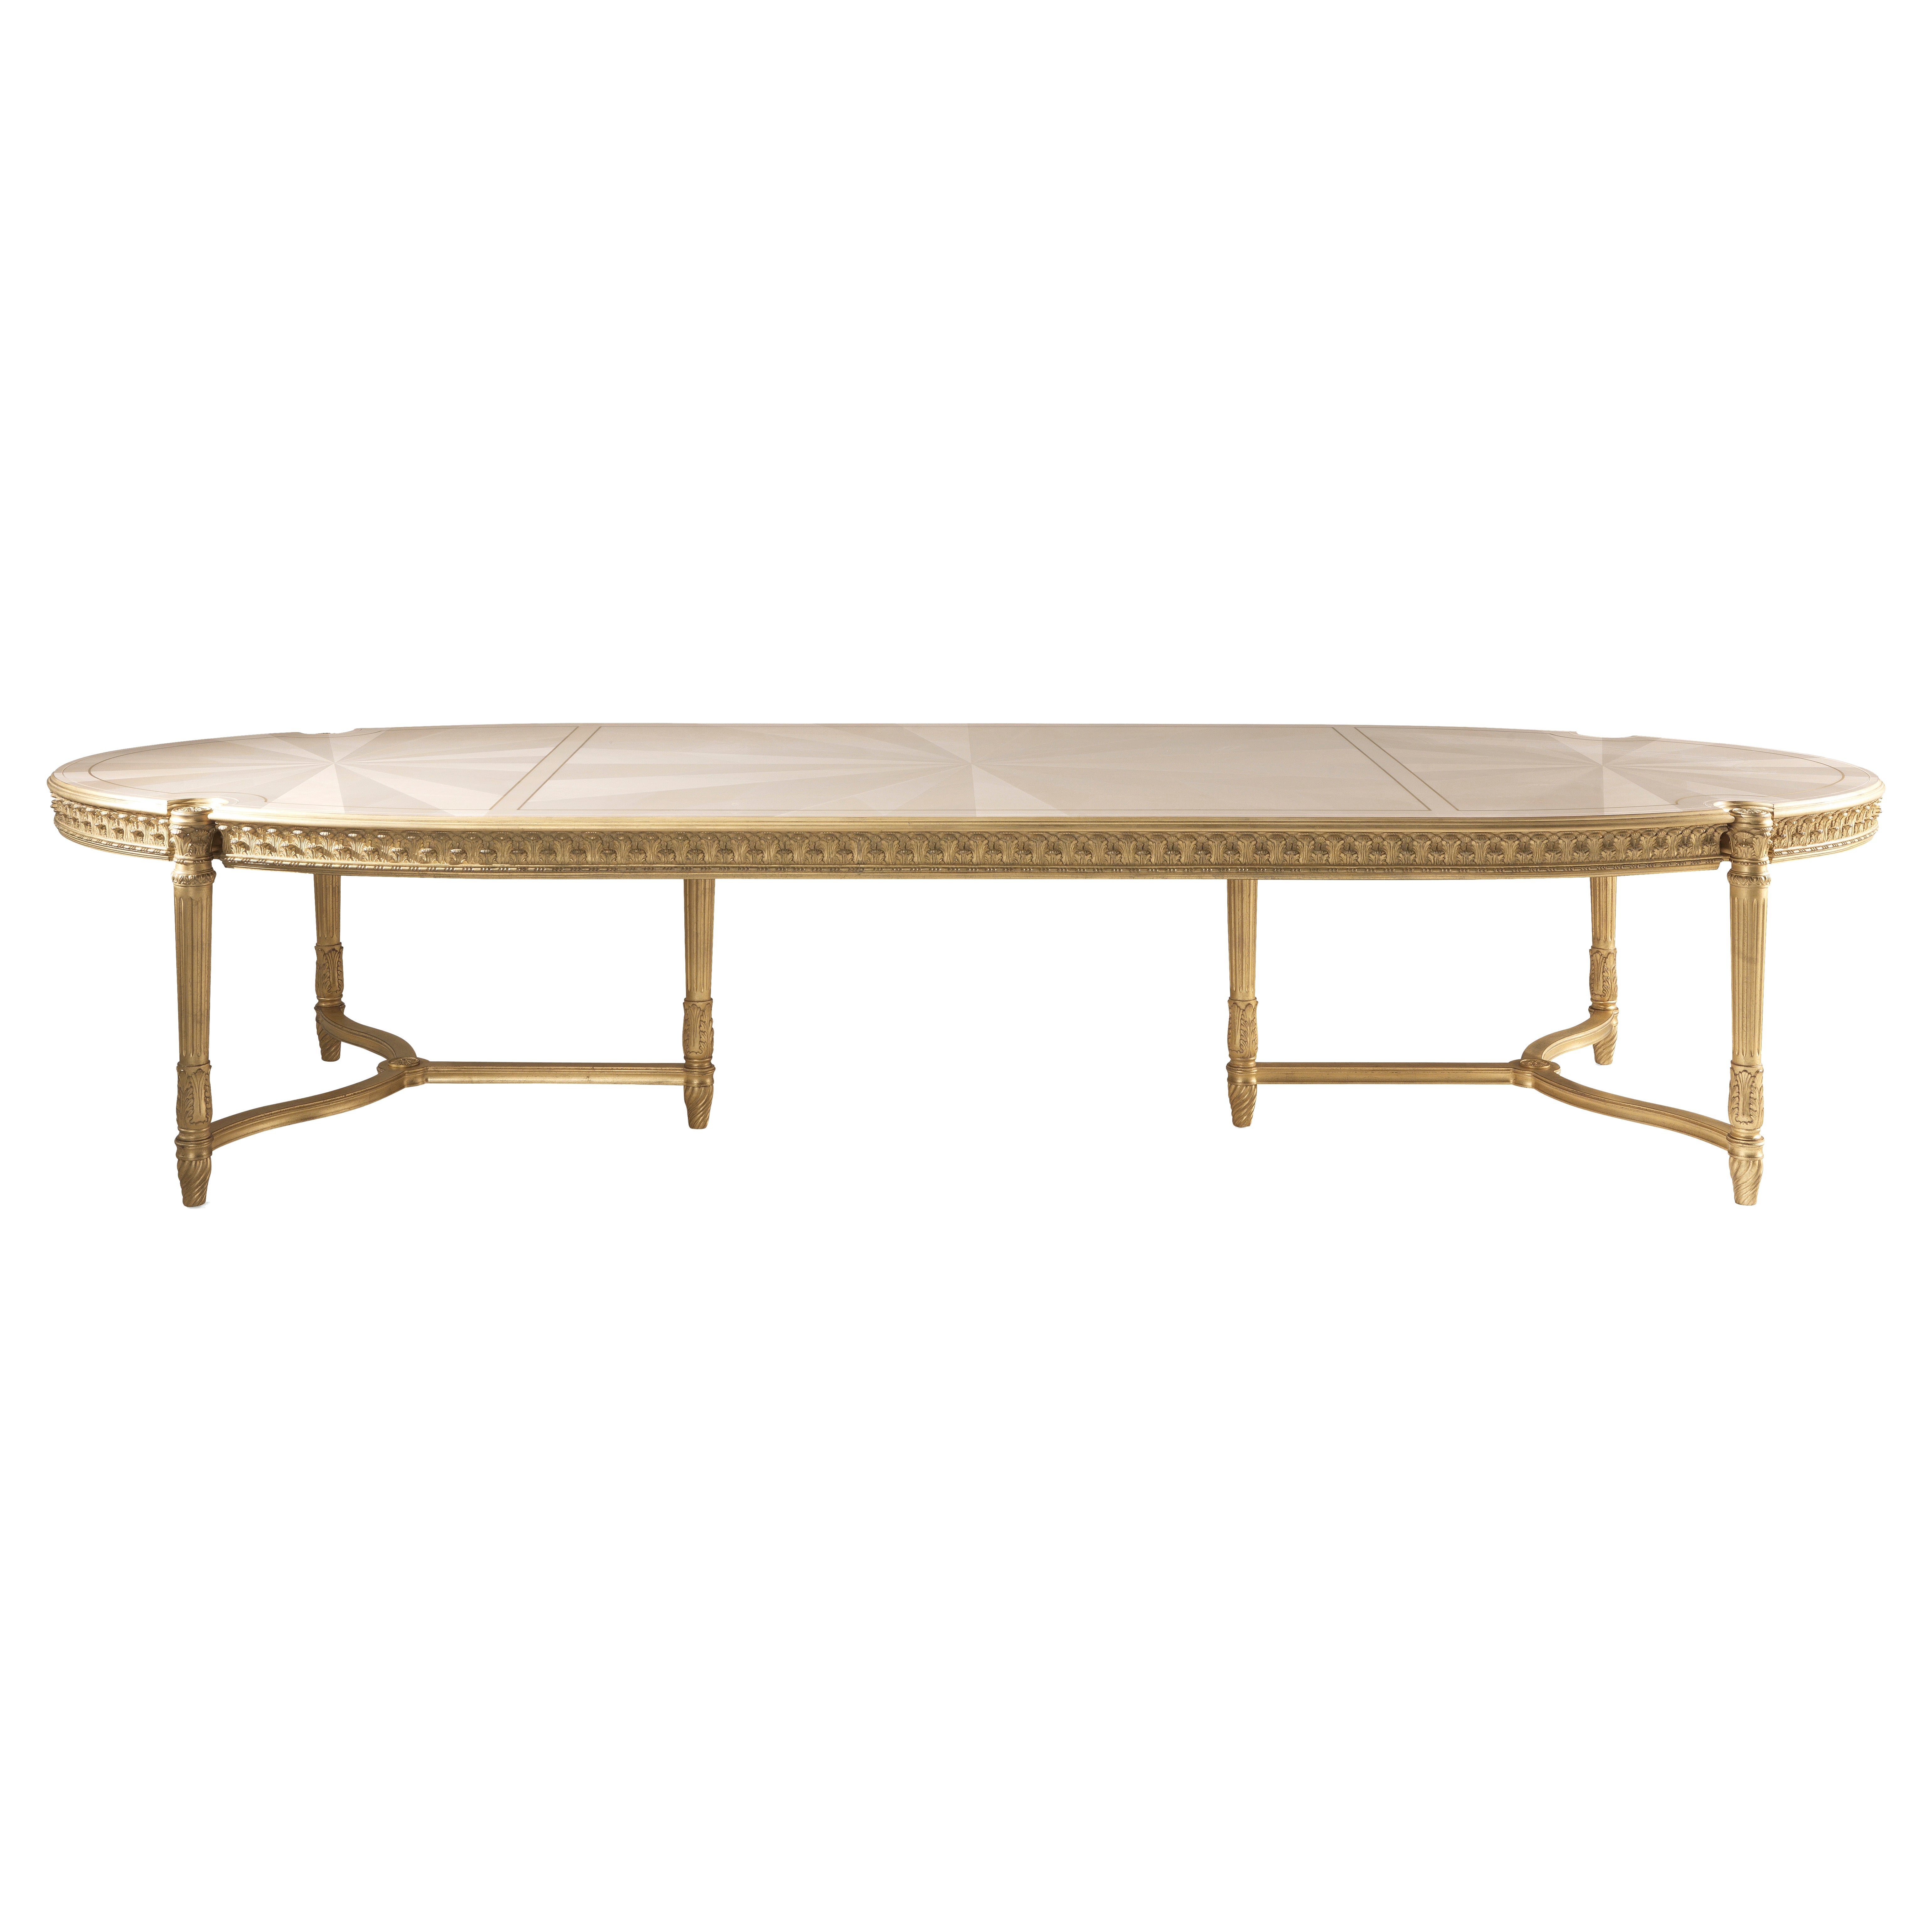 21st Century Boulevard Dining Table with Hand-carved Legs in style of Louis XVI